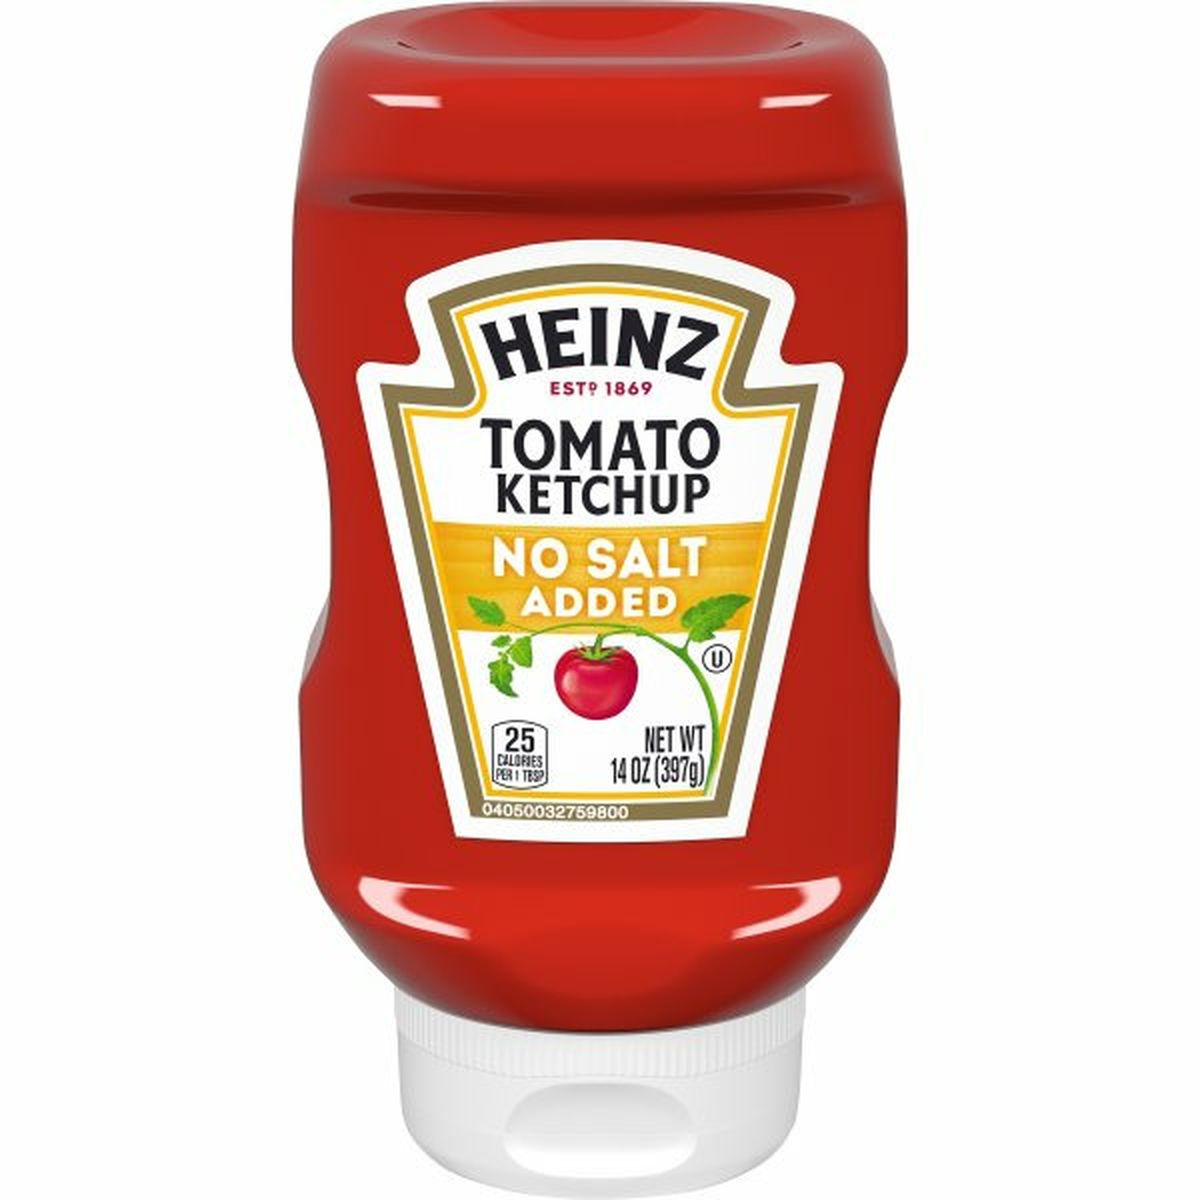 Calories in Heinz No Salt Added Tomato Ketchup